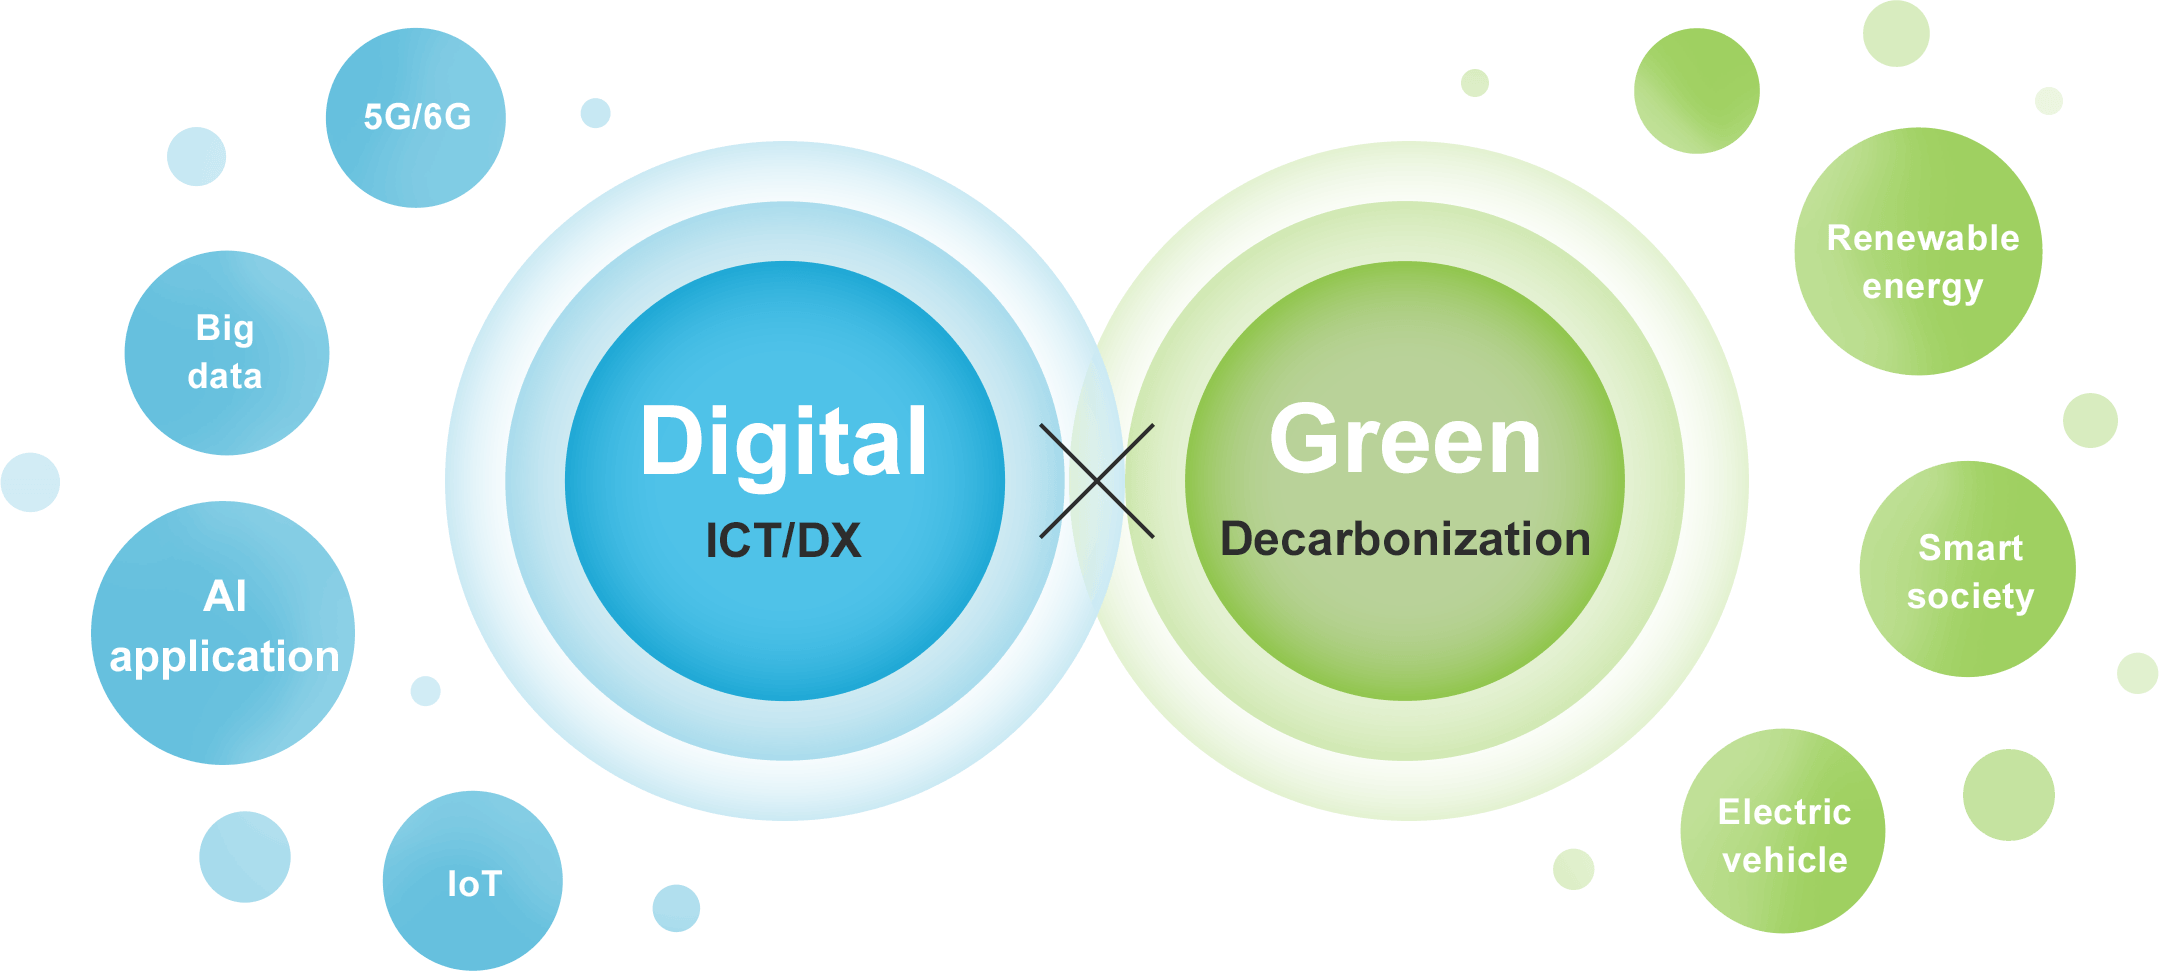 This chart explains the concept of Digital x Green. “Digital” refers to information and communications technology (ICT) and digital transformation (DX), such as 5G/6G, Big data, AI application, and the Internet of Things (IoT). “Green” refers to Decarbonization, which encompasses Renewable energy, Smart society, and Electric vehicles, among others.